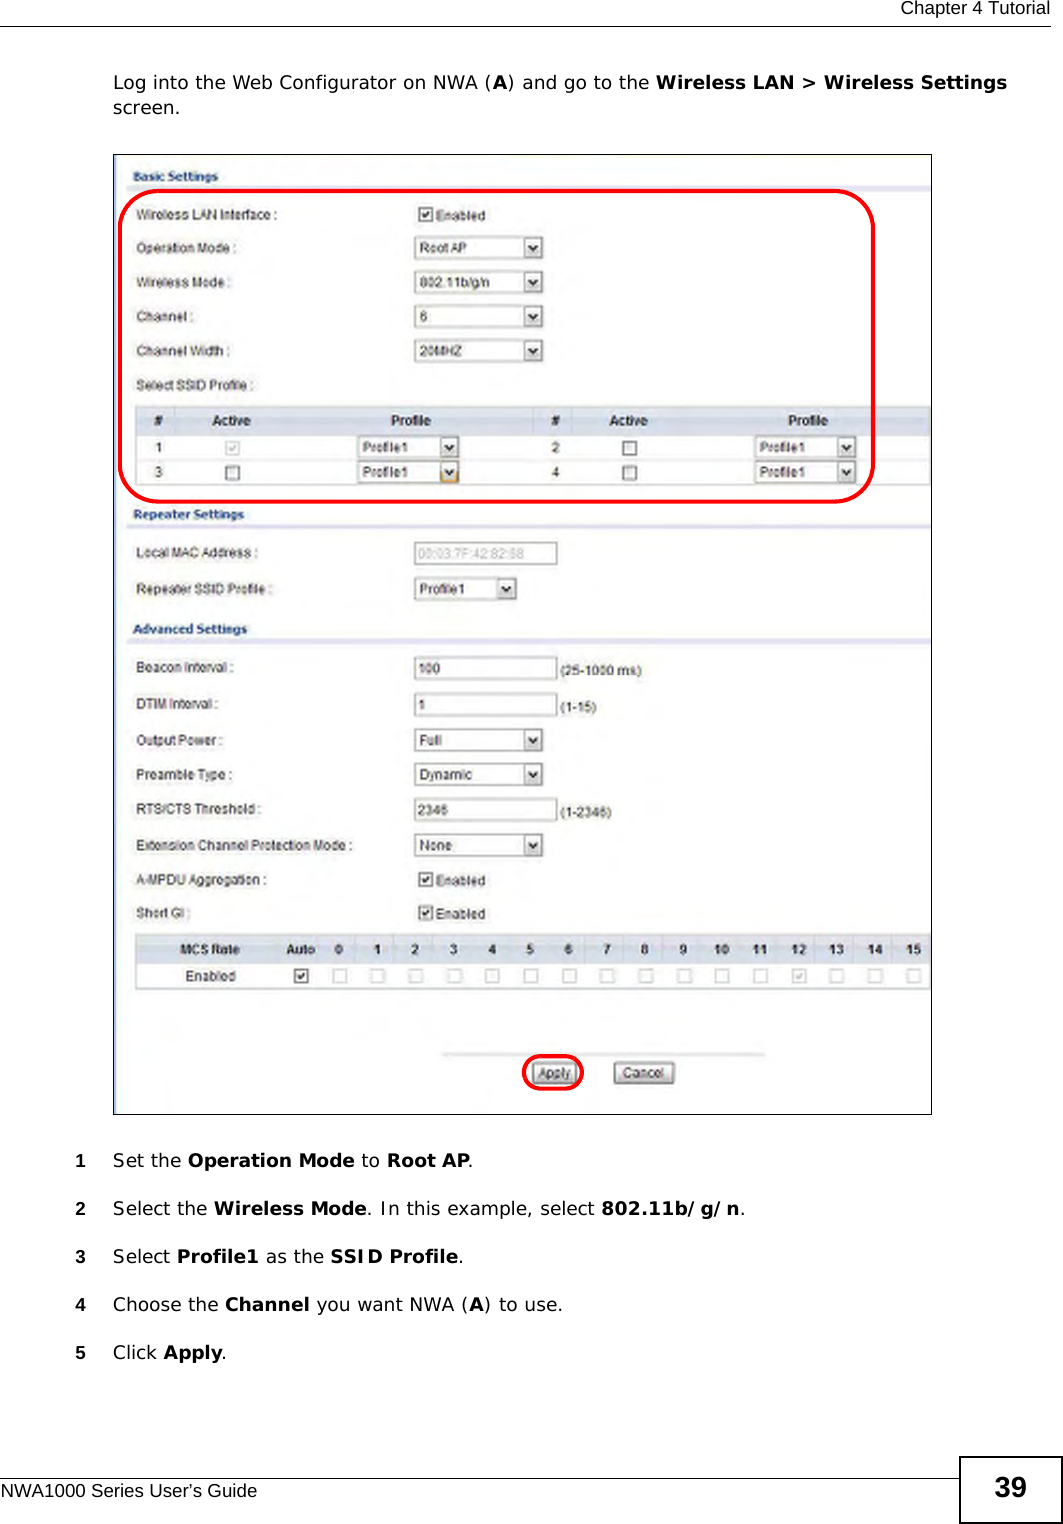  Chapter 4 TutorialNWA1000 Series User’s Guide 39Log into the Web Configurator on NWA (A) and go to the Wireless LAN &gt; Wireless Settings screen.1Set the Operation Mode to Root AP.2Select the Wireless Mode. In this example, select 802.11b/g/n. 3Select Profile1 as the SSID Profile. 4Choose the Channel you want NWA (A) to use.5Click Apply. 